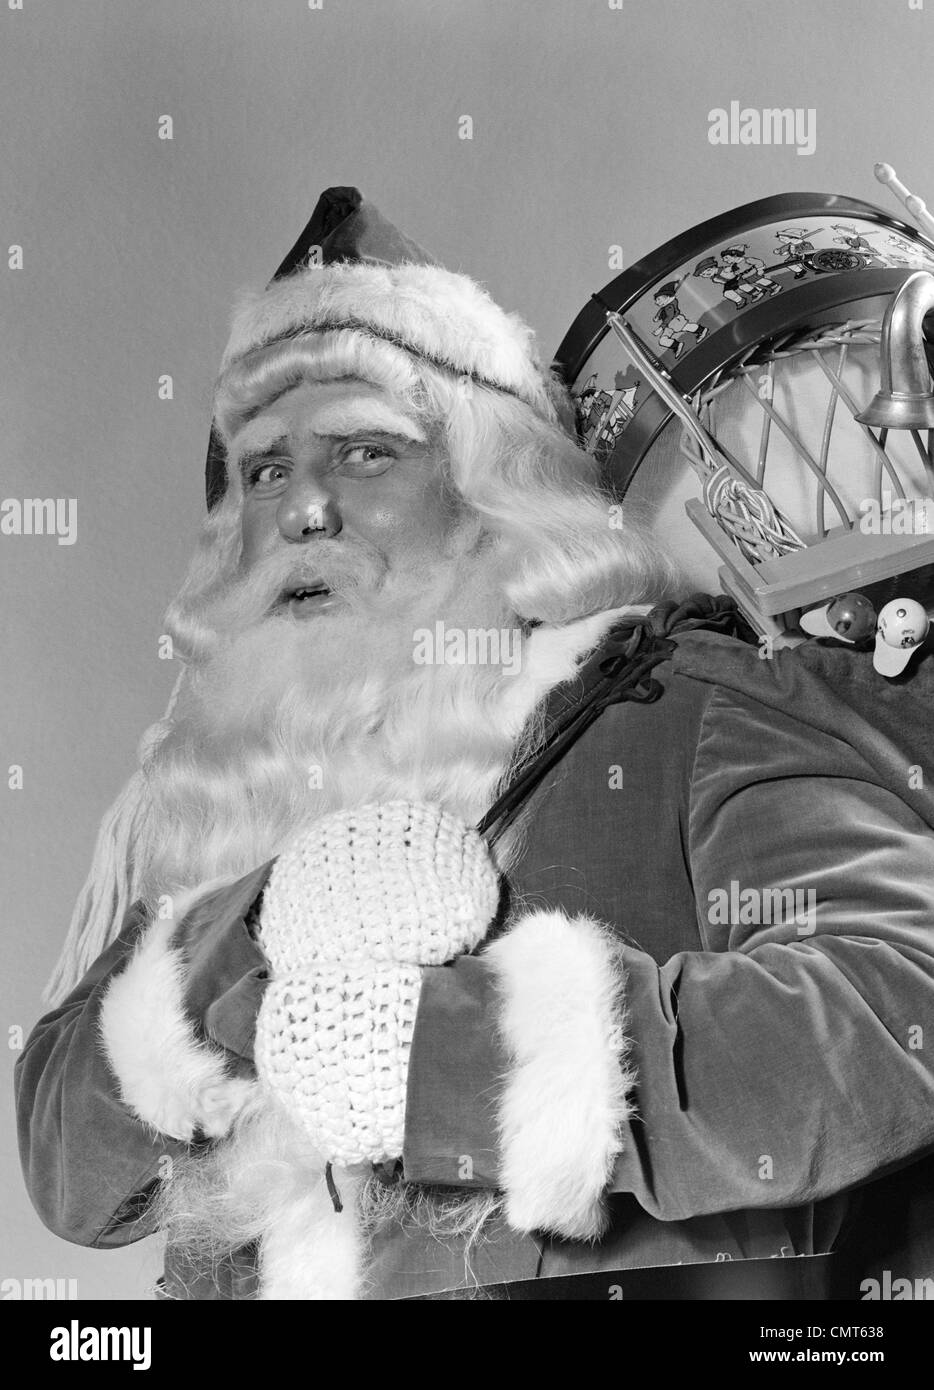 1940s PORTRAIT OF SMILING SANTA CLAUS WITH A SACK FOR OF TOY PRESENTS SLUNG OVER HIS SHOULDER LOOKING AT CAMERA Stock Photo